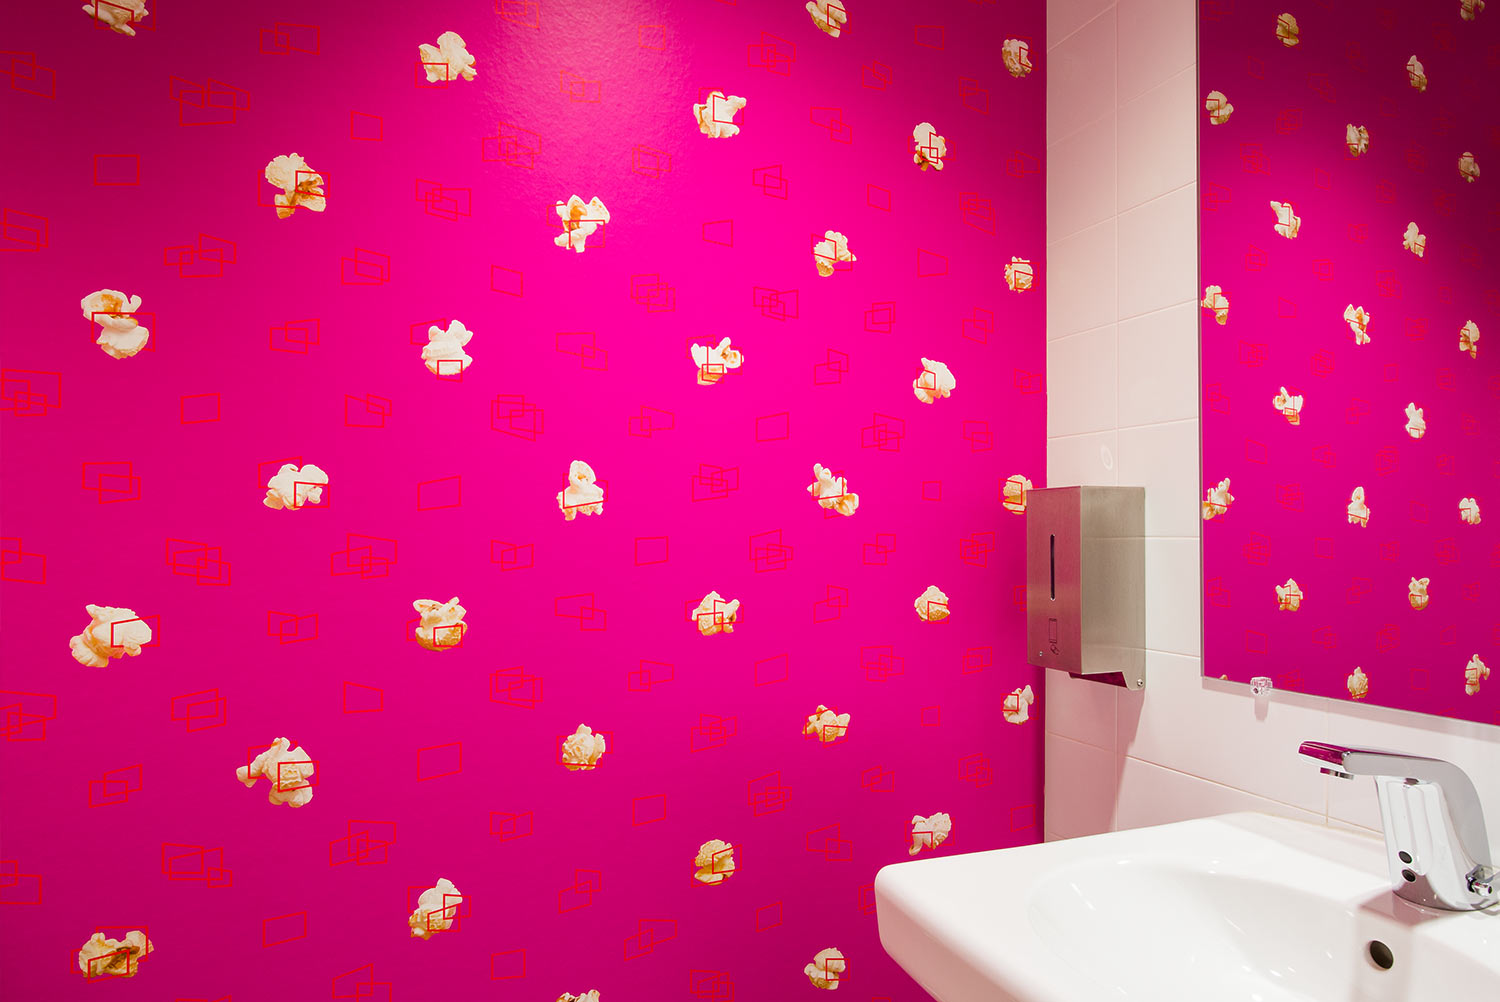 Branded custom printed popcorn wallpaper at the Parkway Theatre in Baltimore